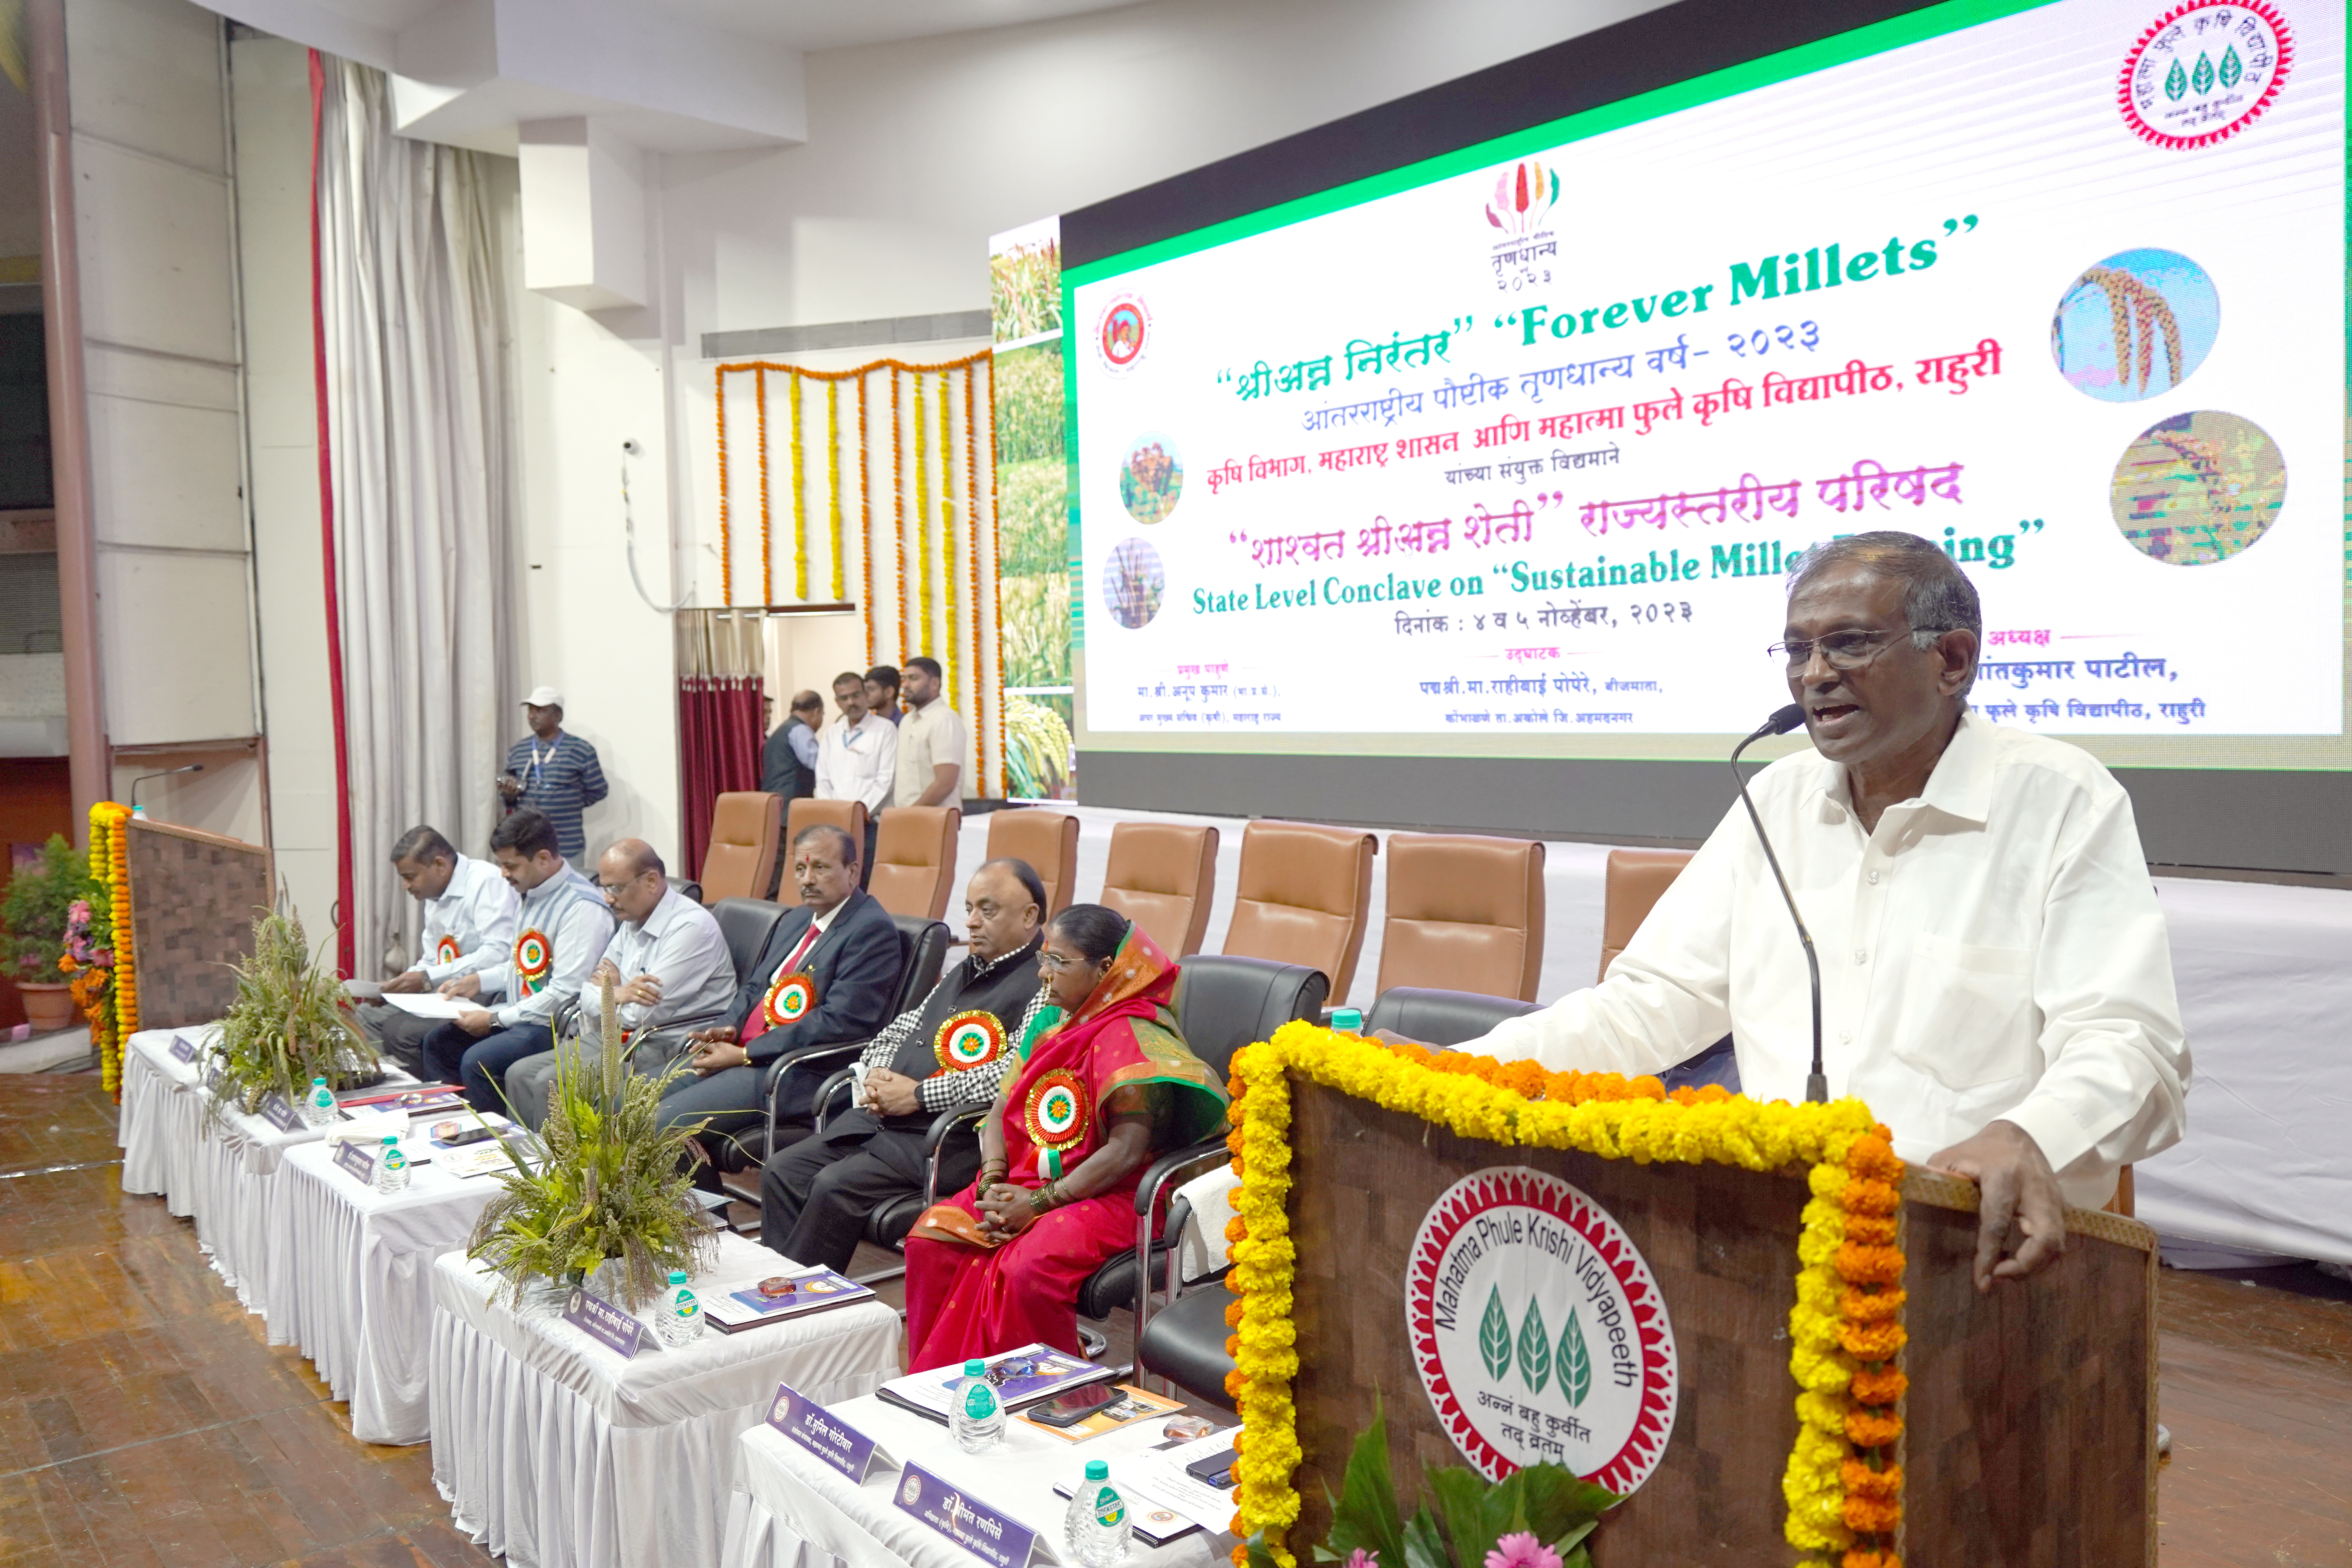 State Level Conclave on Sustainable Millet Farming  4-5,Nov.,2023